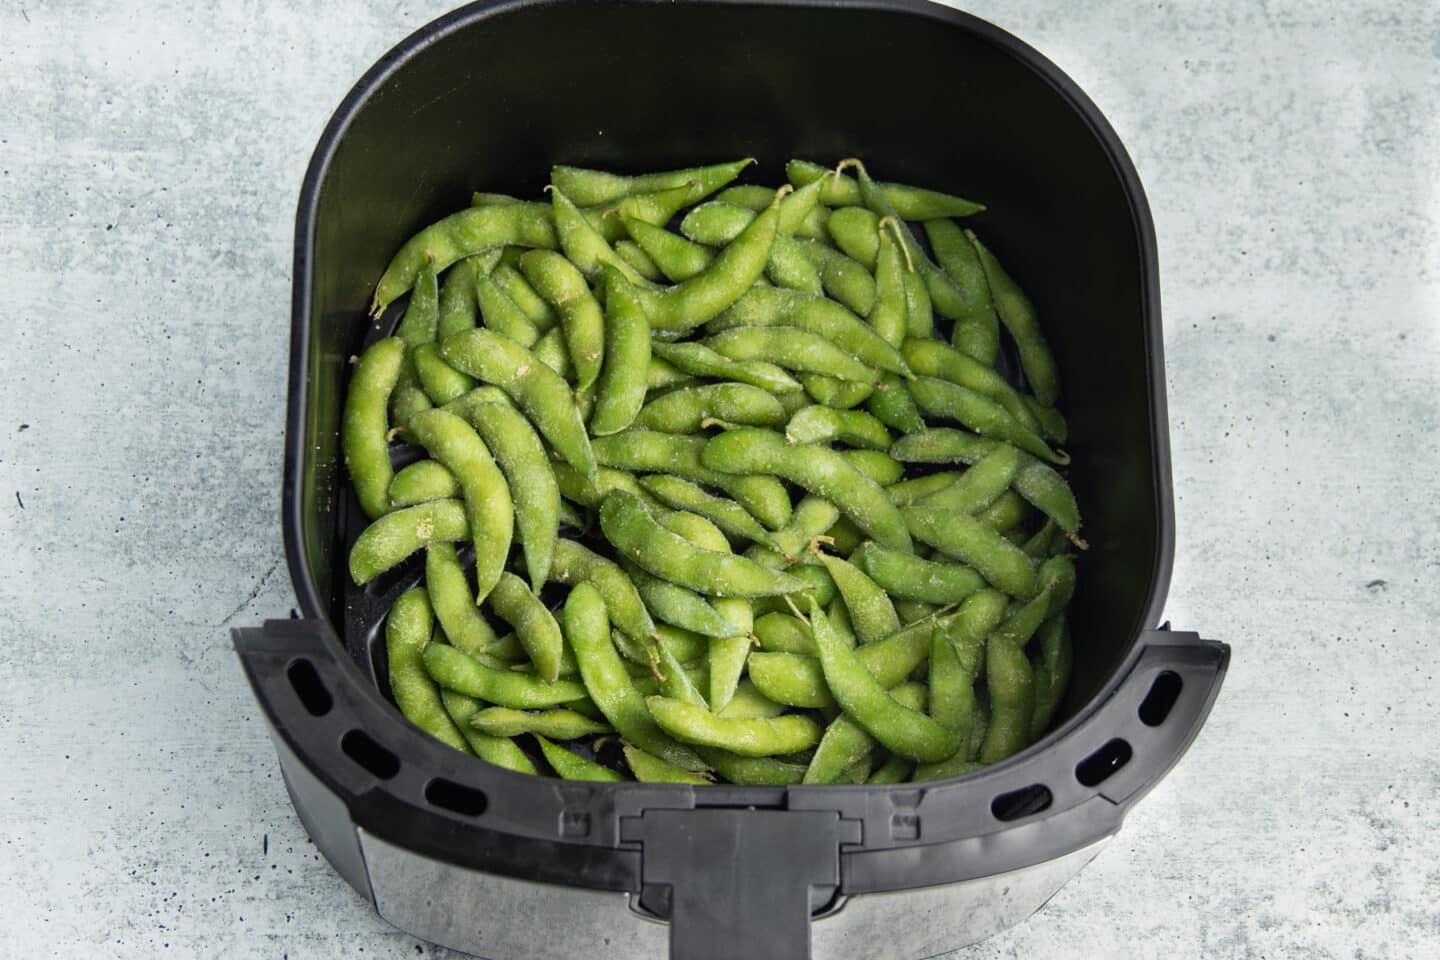 This is picture of edamame in an air fryer basket.